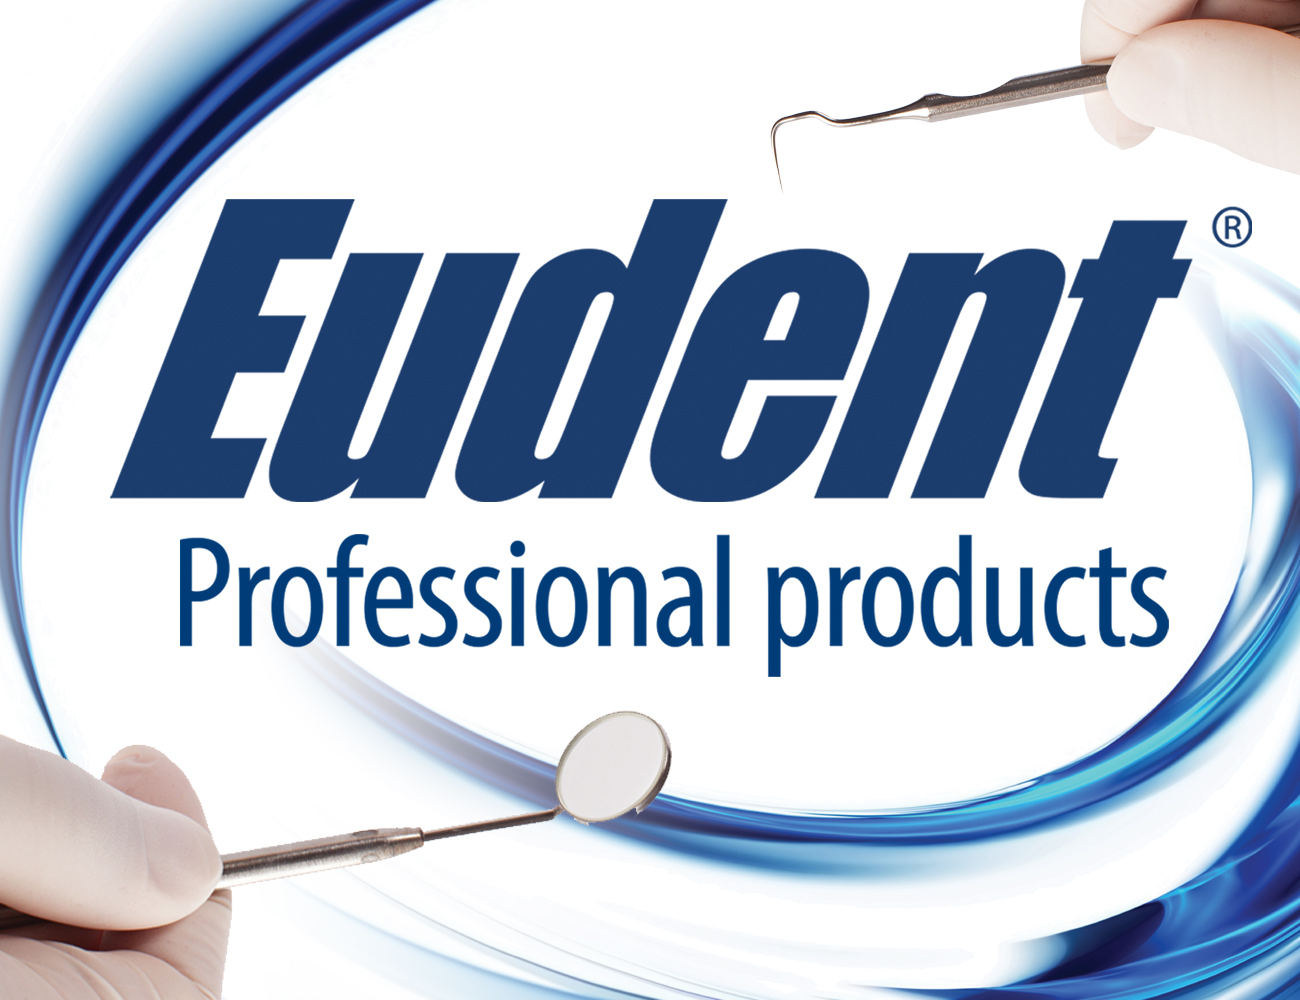 EUDENT (Dental products for Professional use)